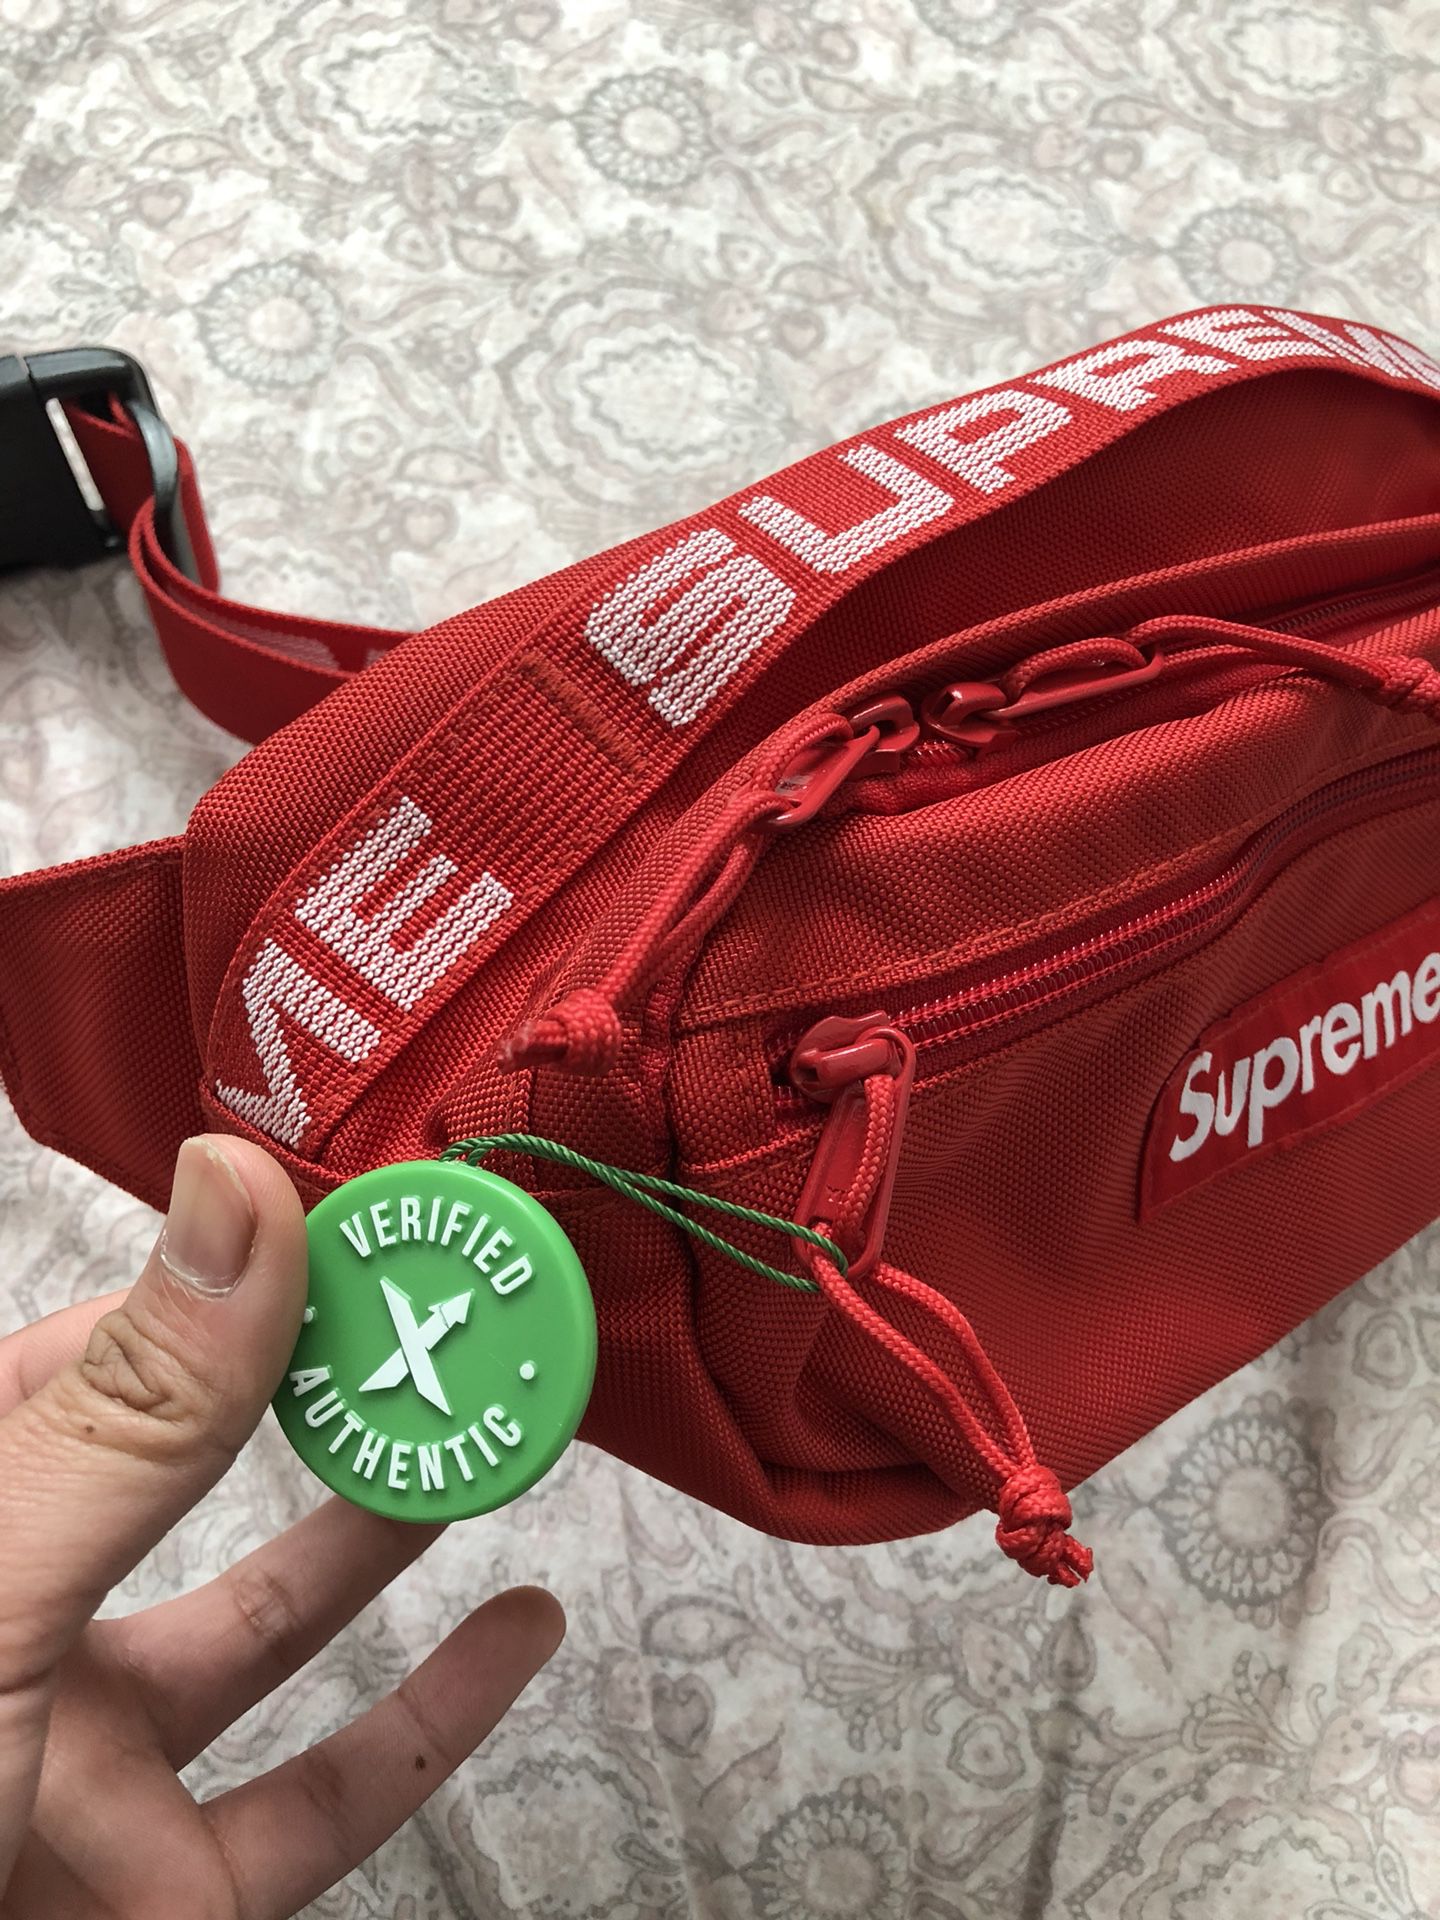 Supreme Waist Bag (SS18) for Sale in Tulare, CA - OfferUp